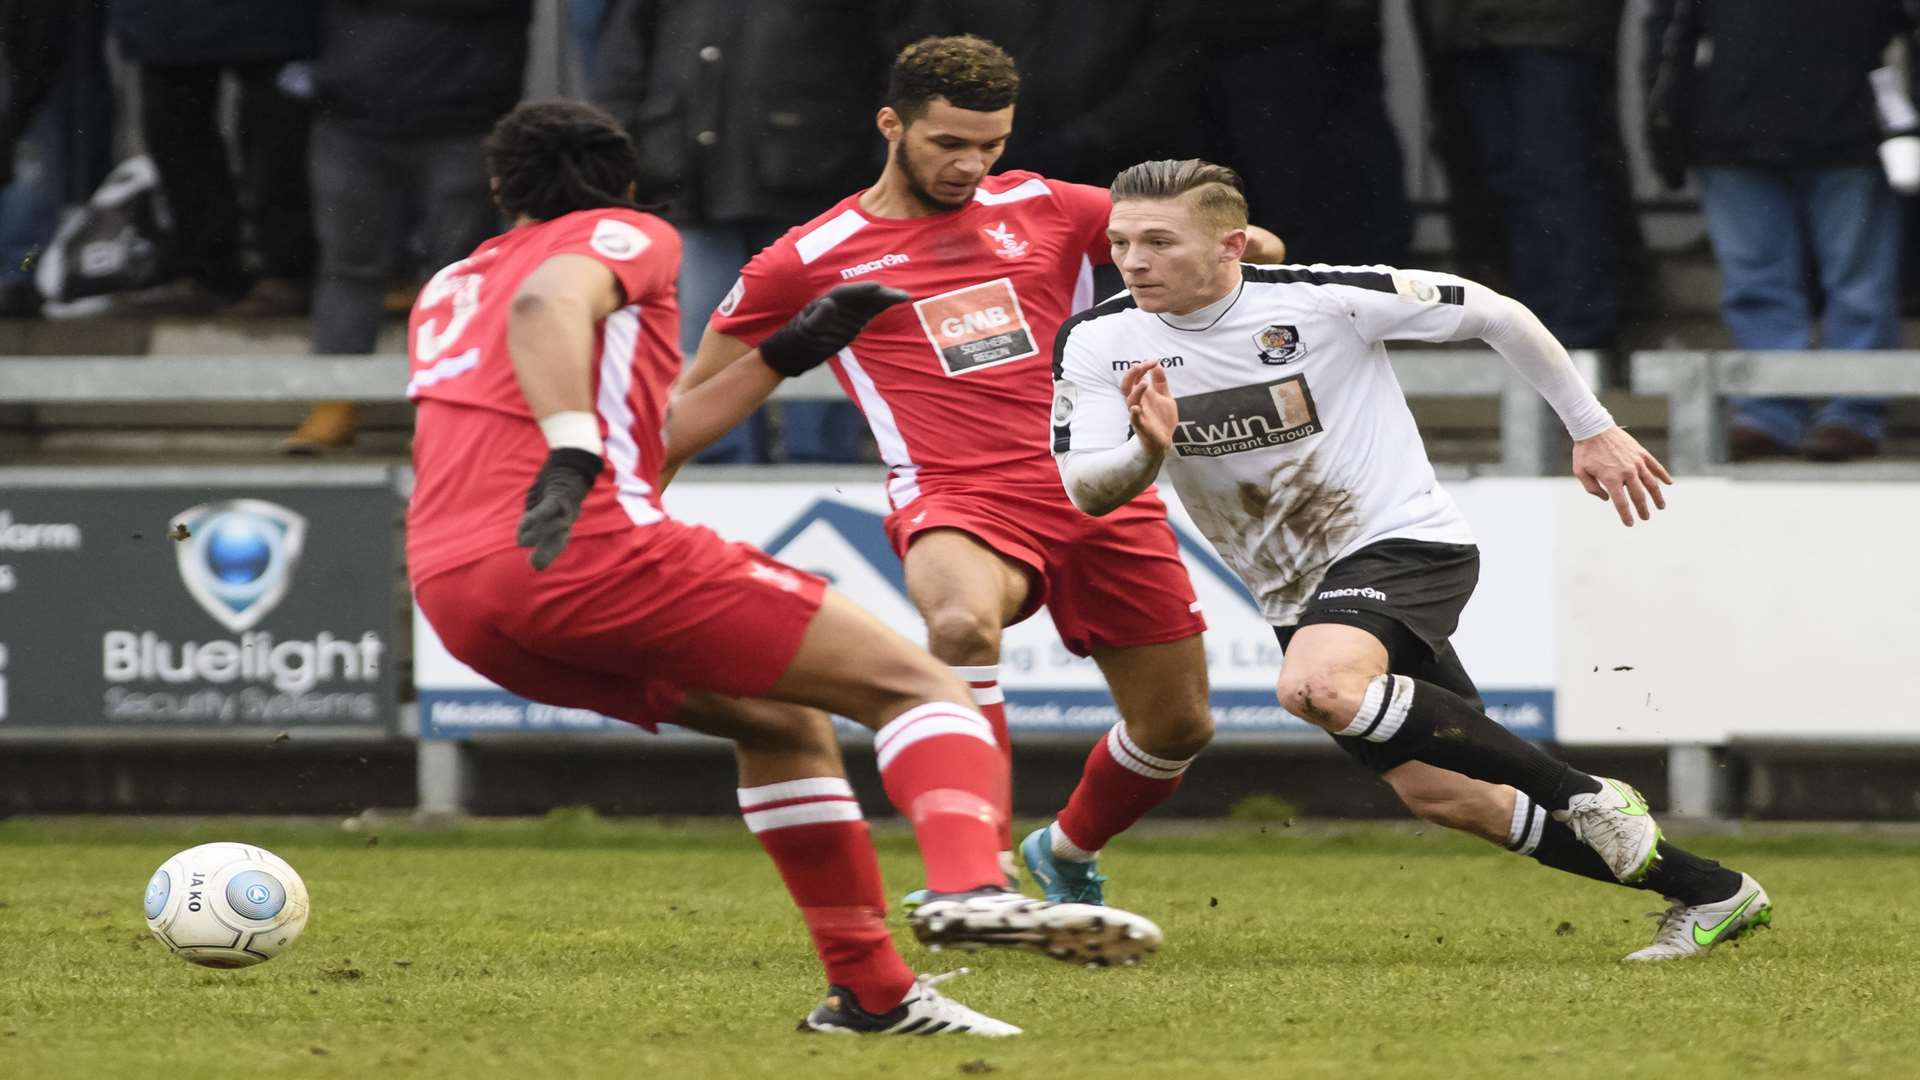 Andy Pugh scored twice in Dartford's 3-1 win over Whitehawk Picture: Andy Payton